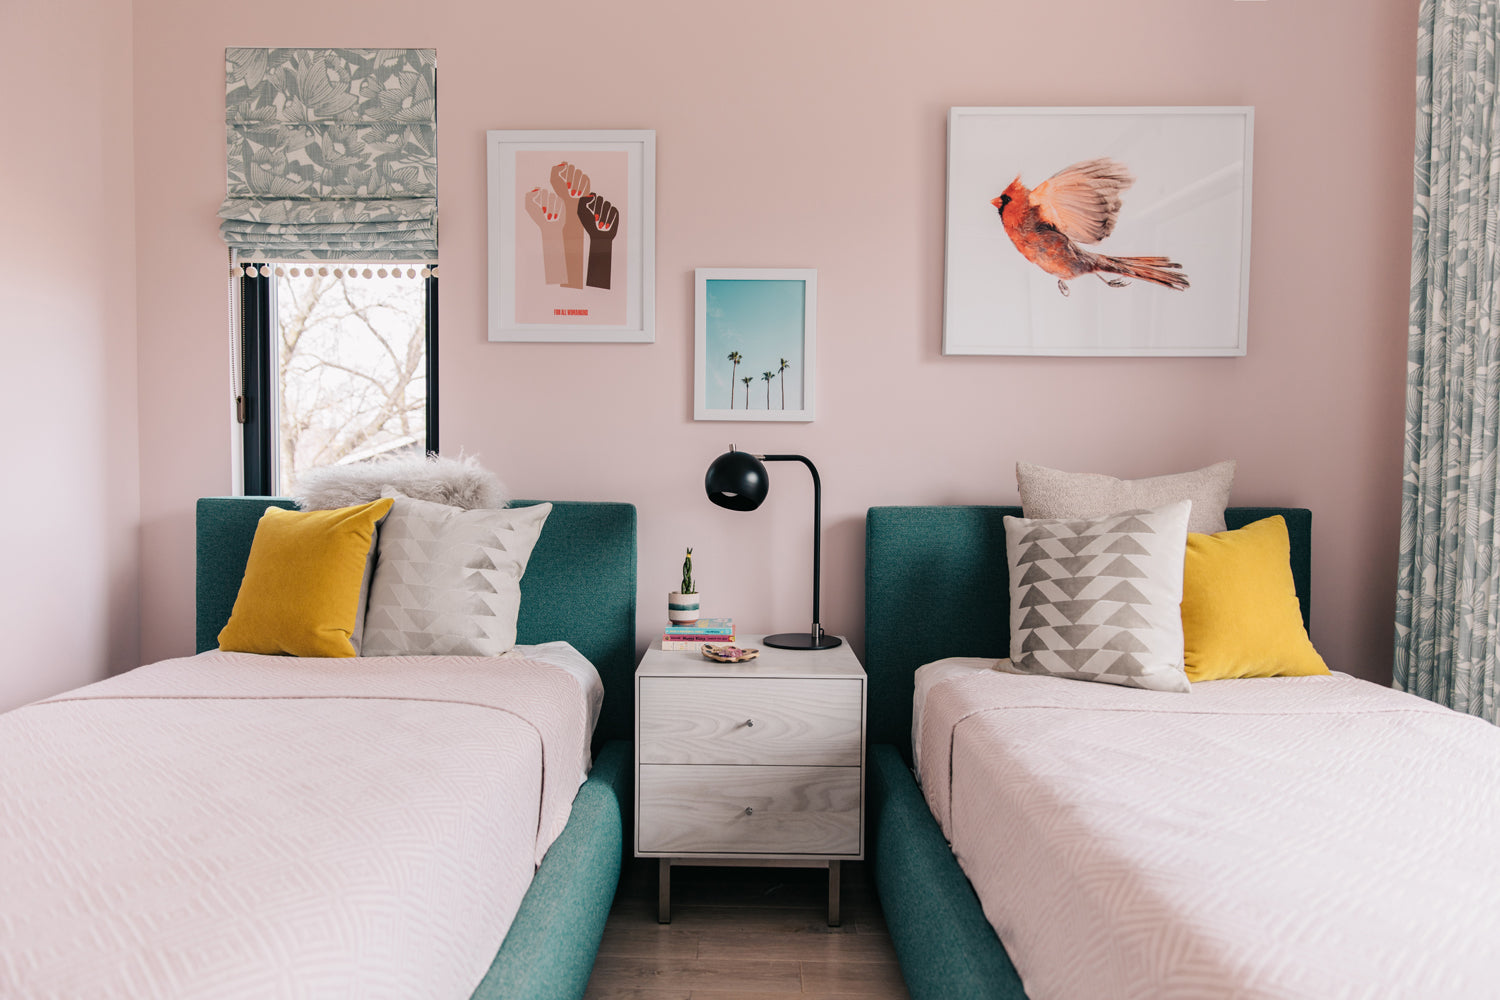 A Shared Bedroom for Two Sisters